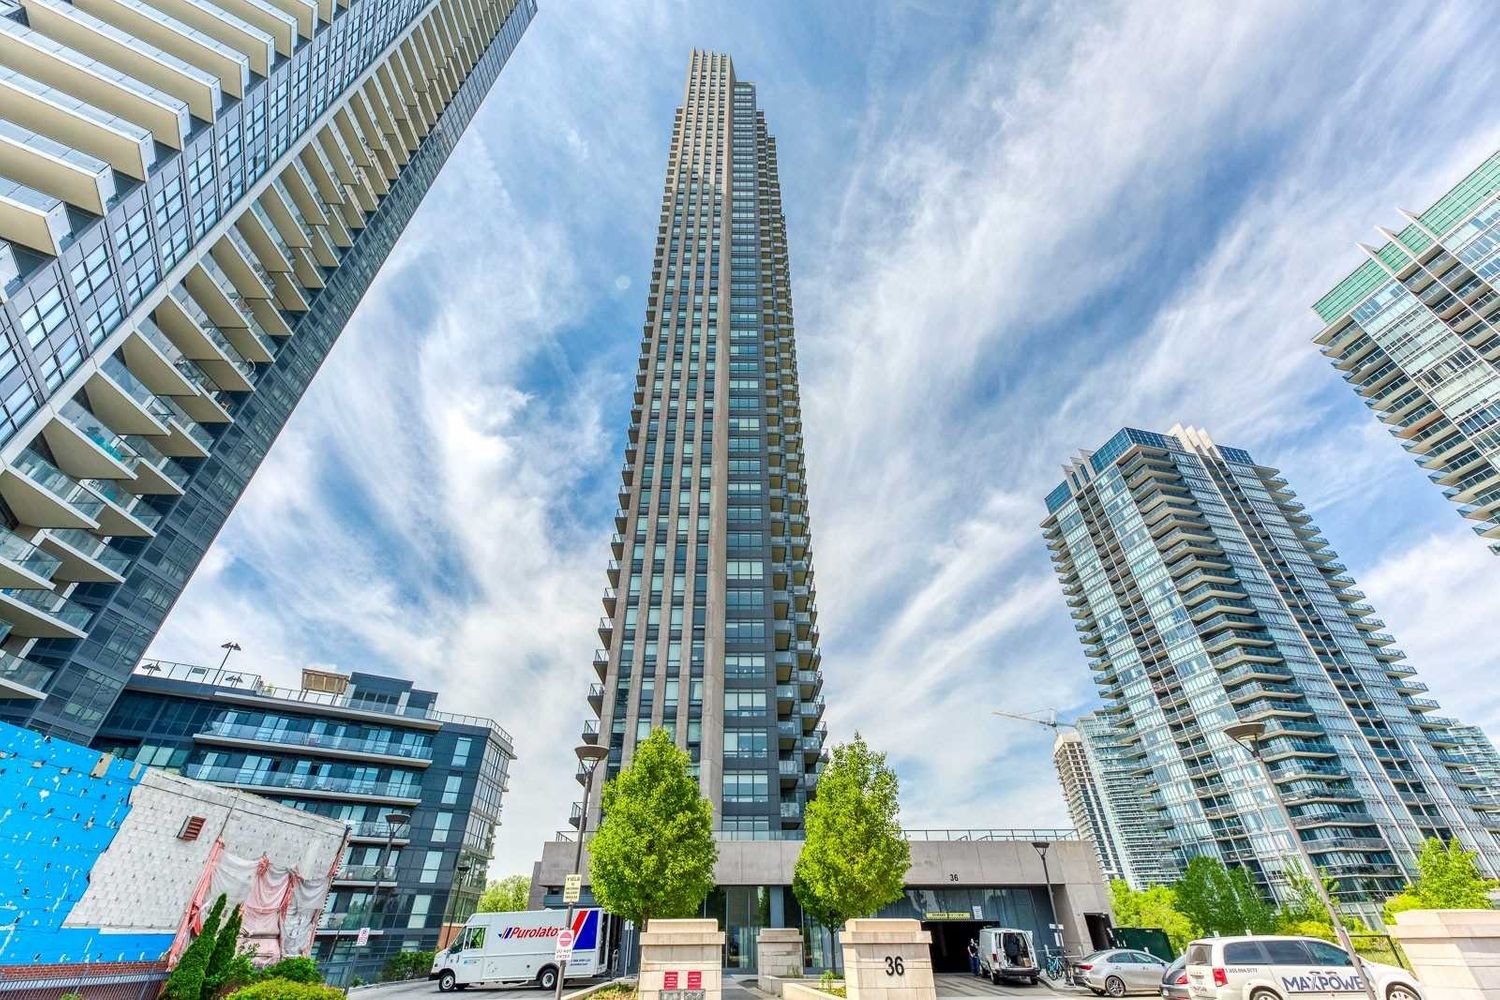 36 Park Lawn Road. Key West Condos is located in  Etobicoke, Toronto - image #1 of 2